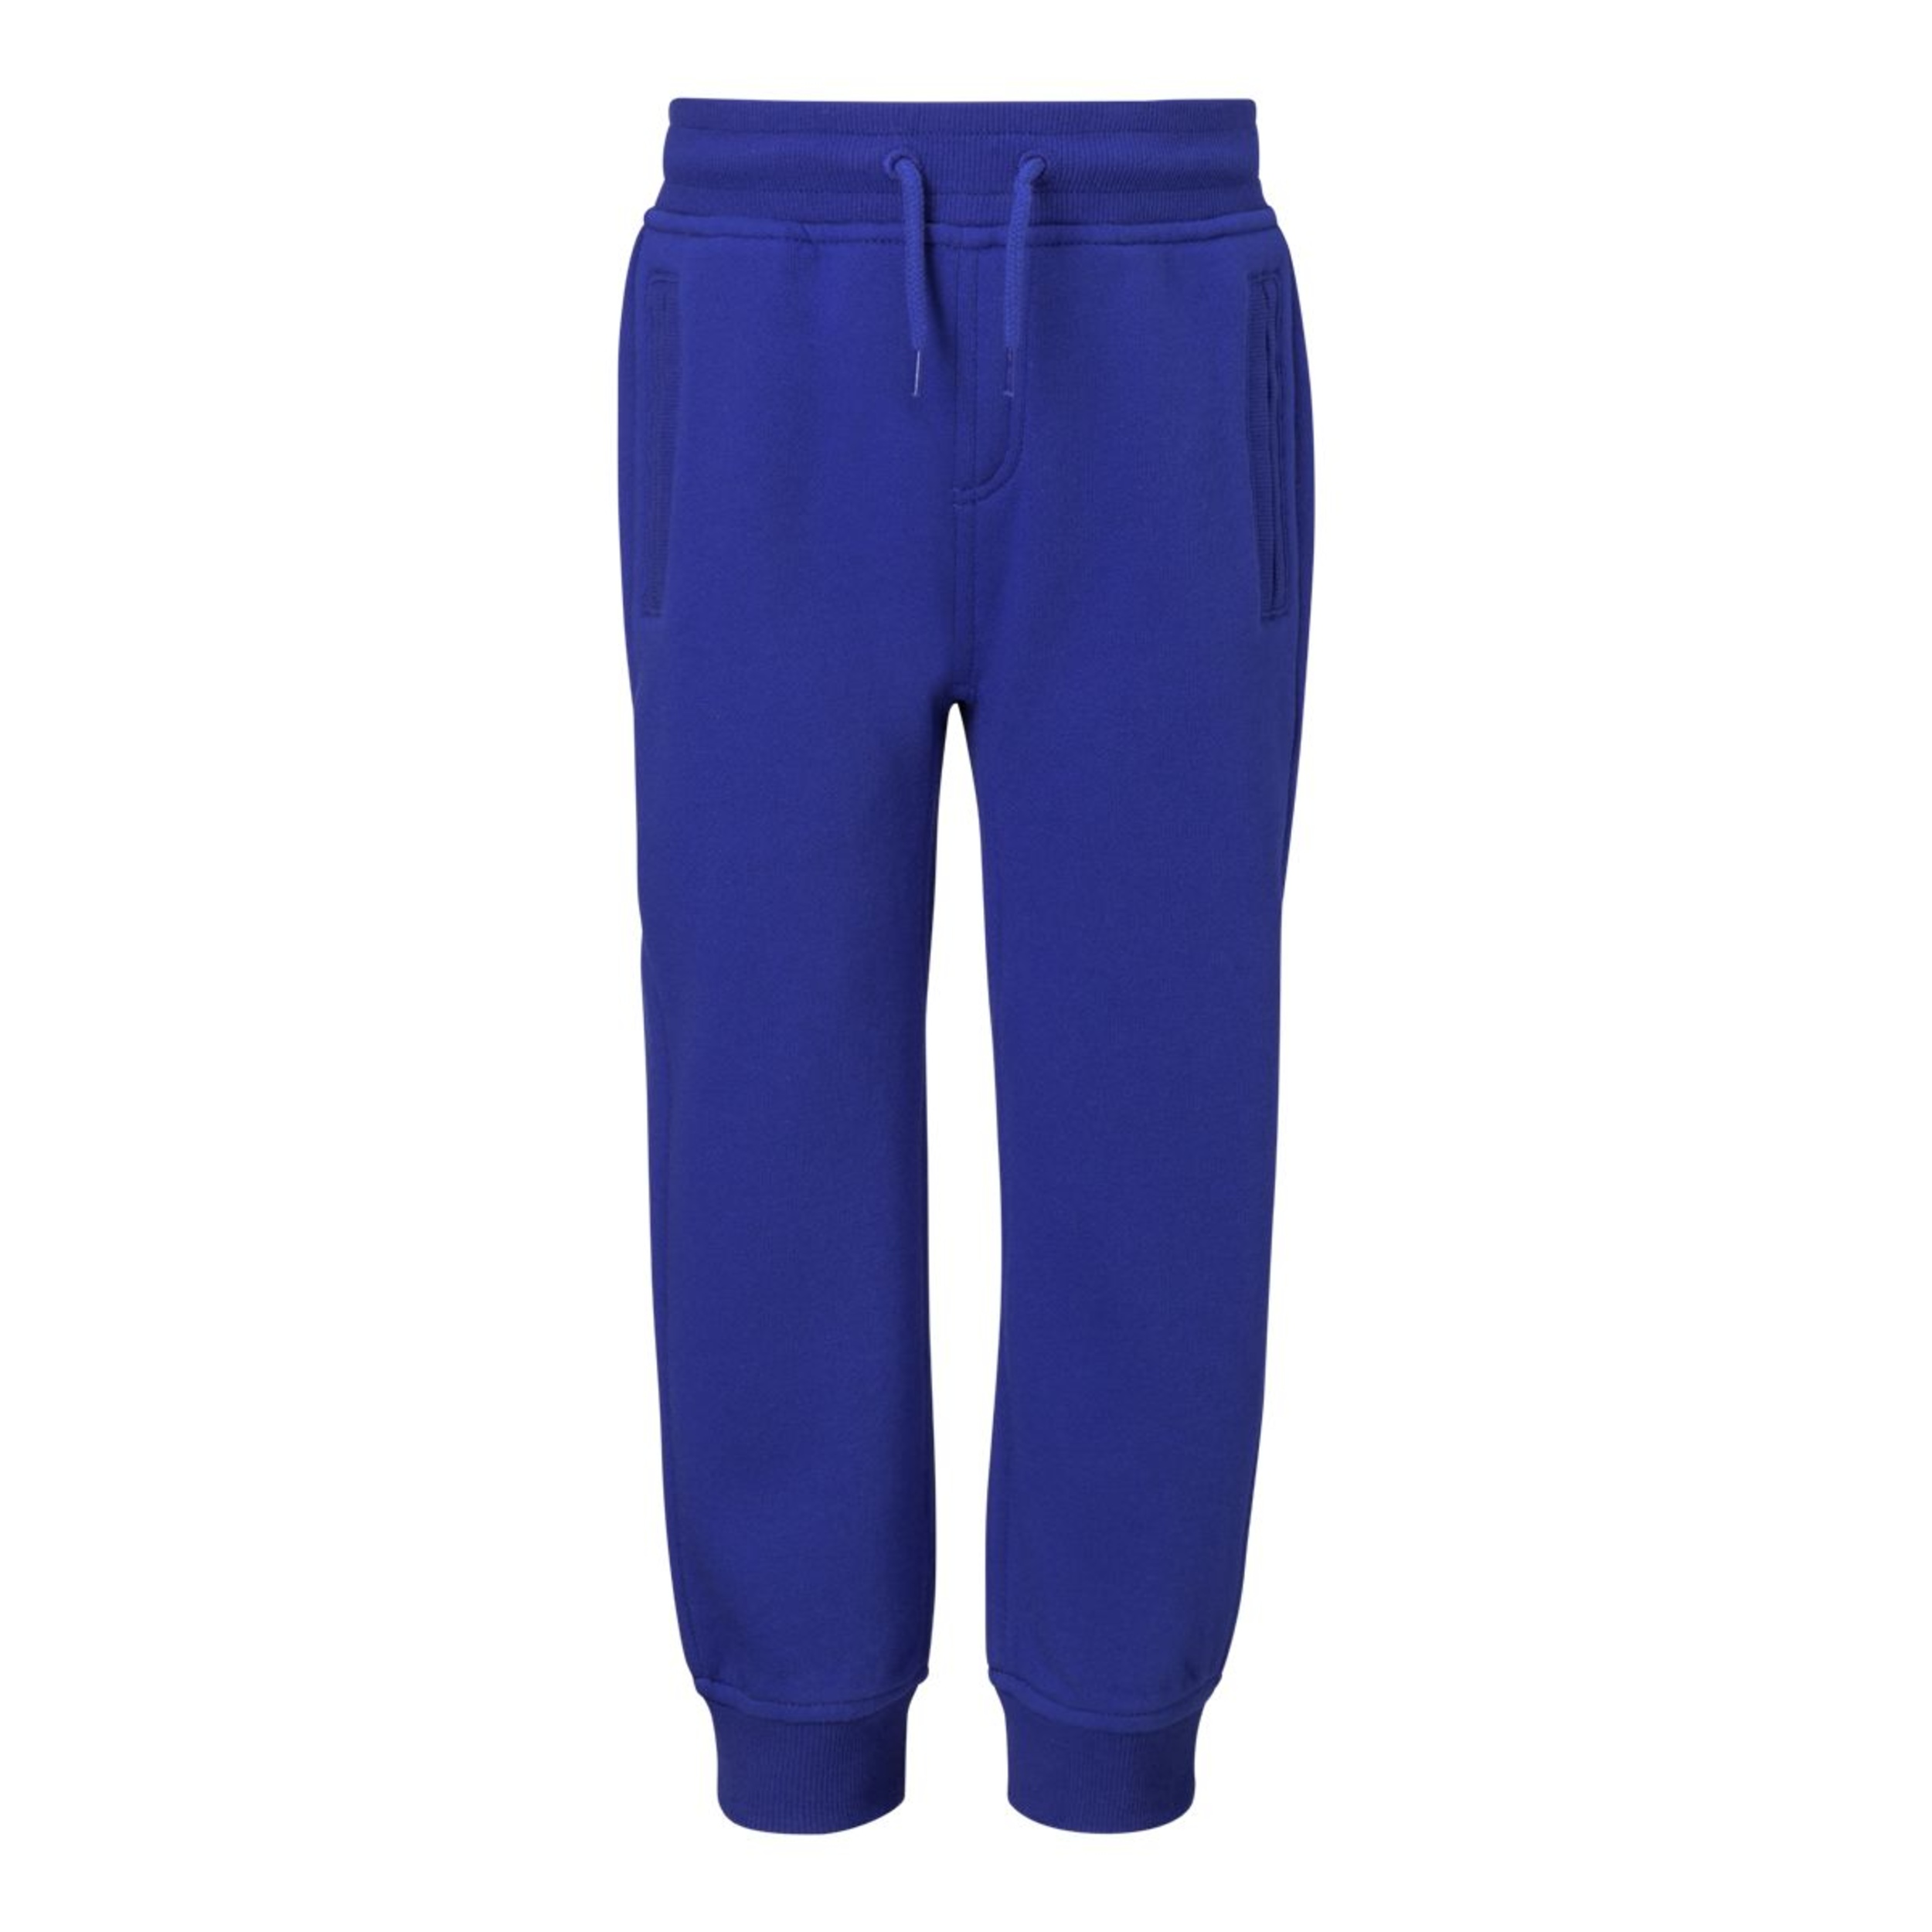 Ripzone Kids' Toddler Boys' 2-6 Roe Sweatpants, Joggers, Casual, Lounge ...